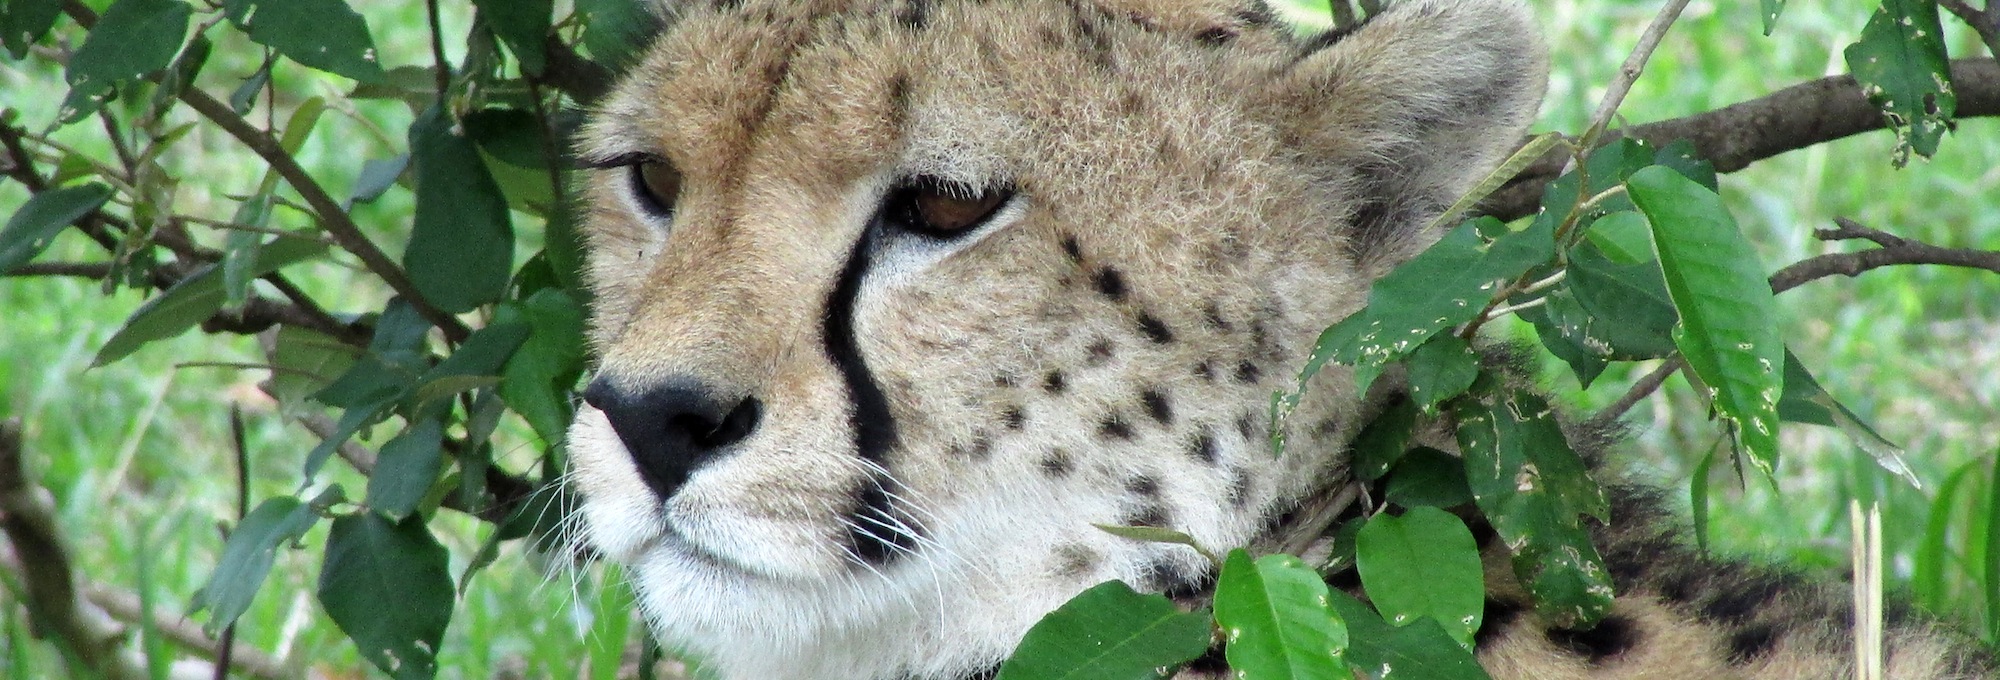 ...the impressive figure of cheetah giving to your eyes the pleasure of looking at him...